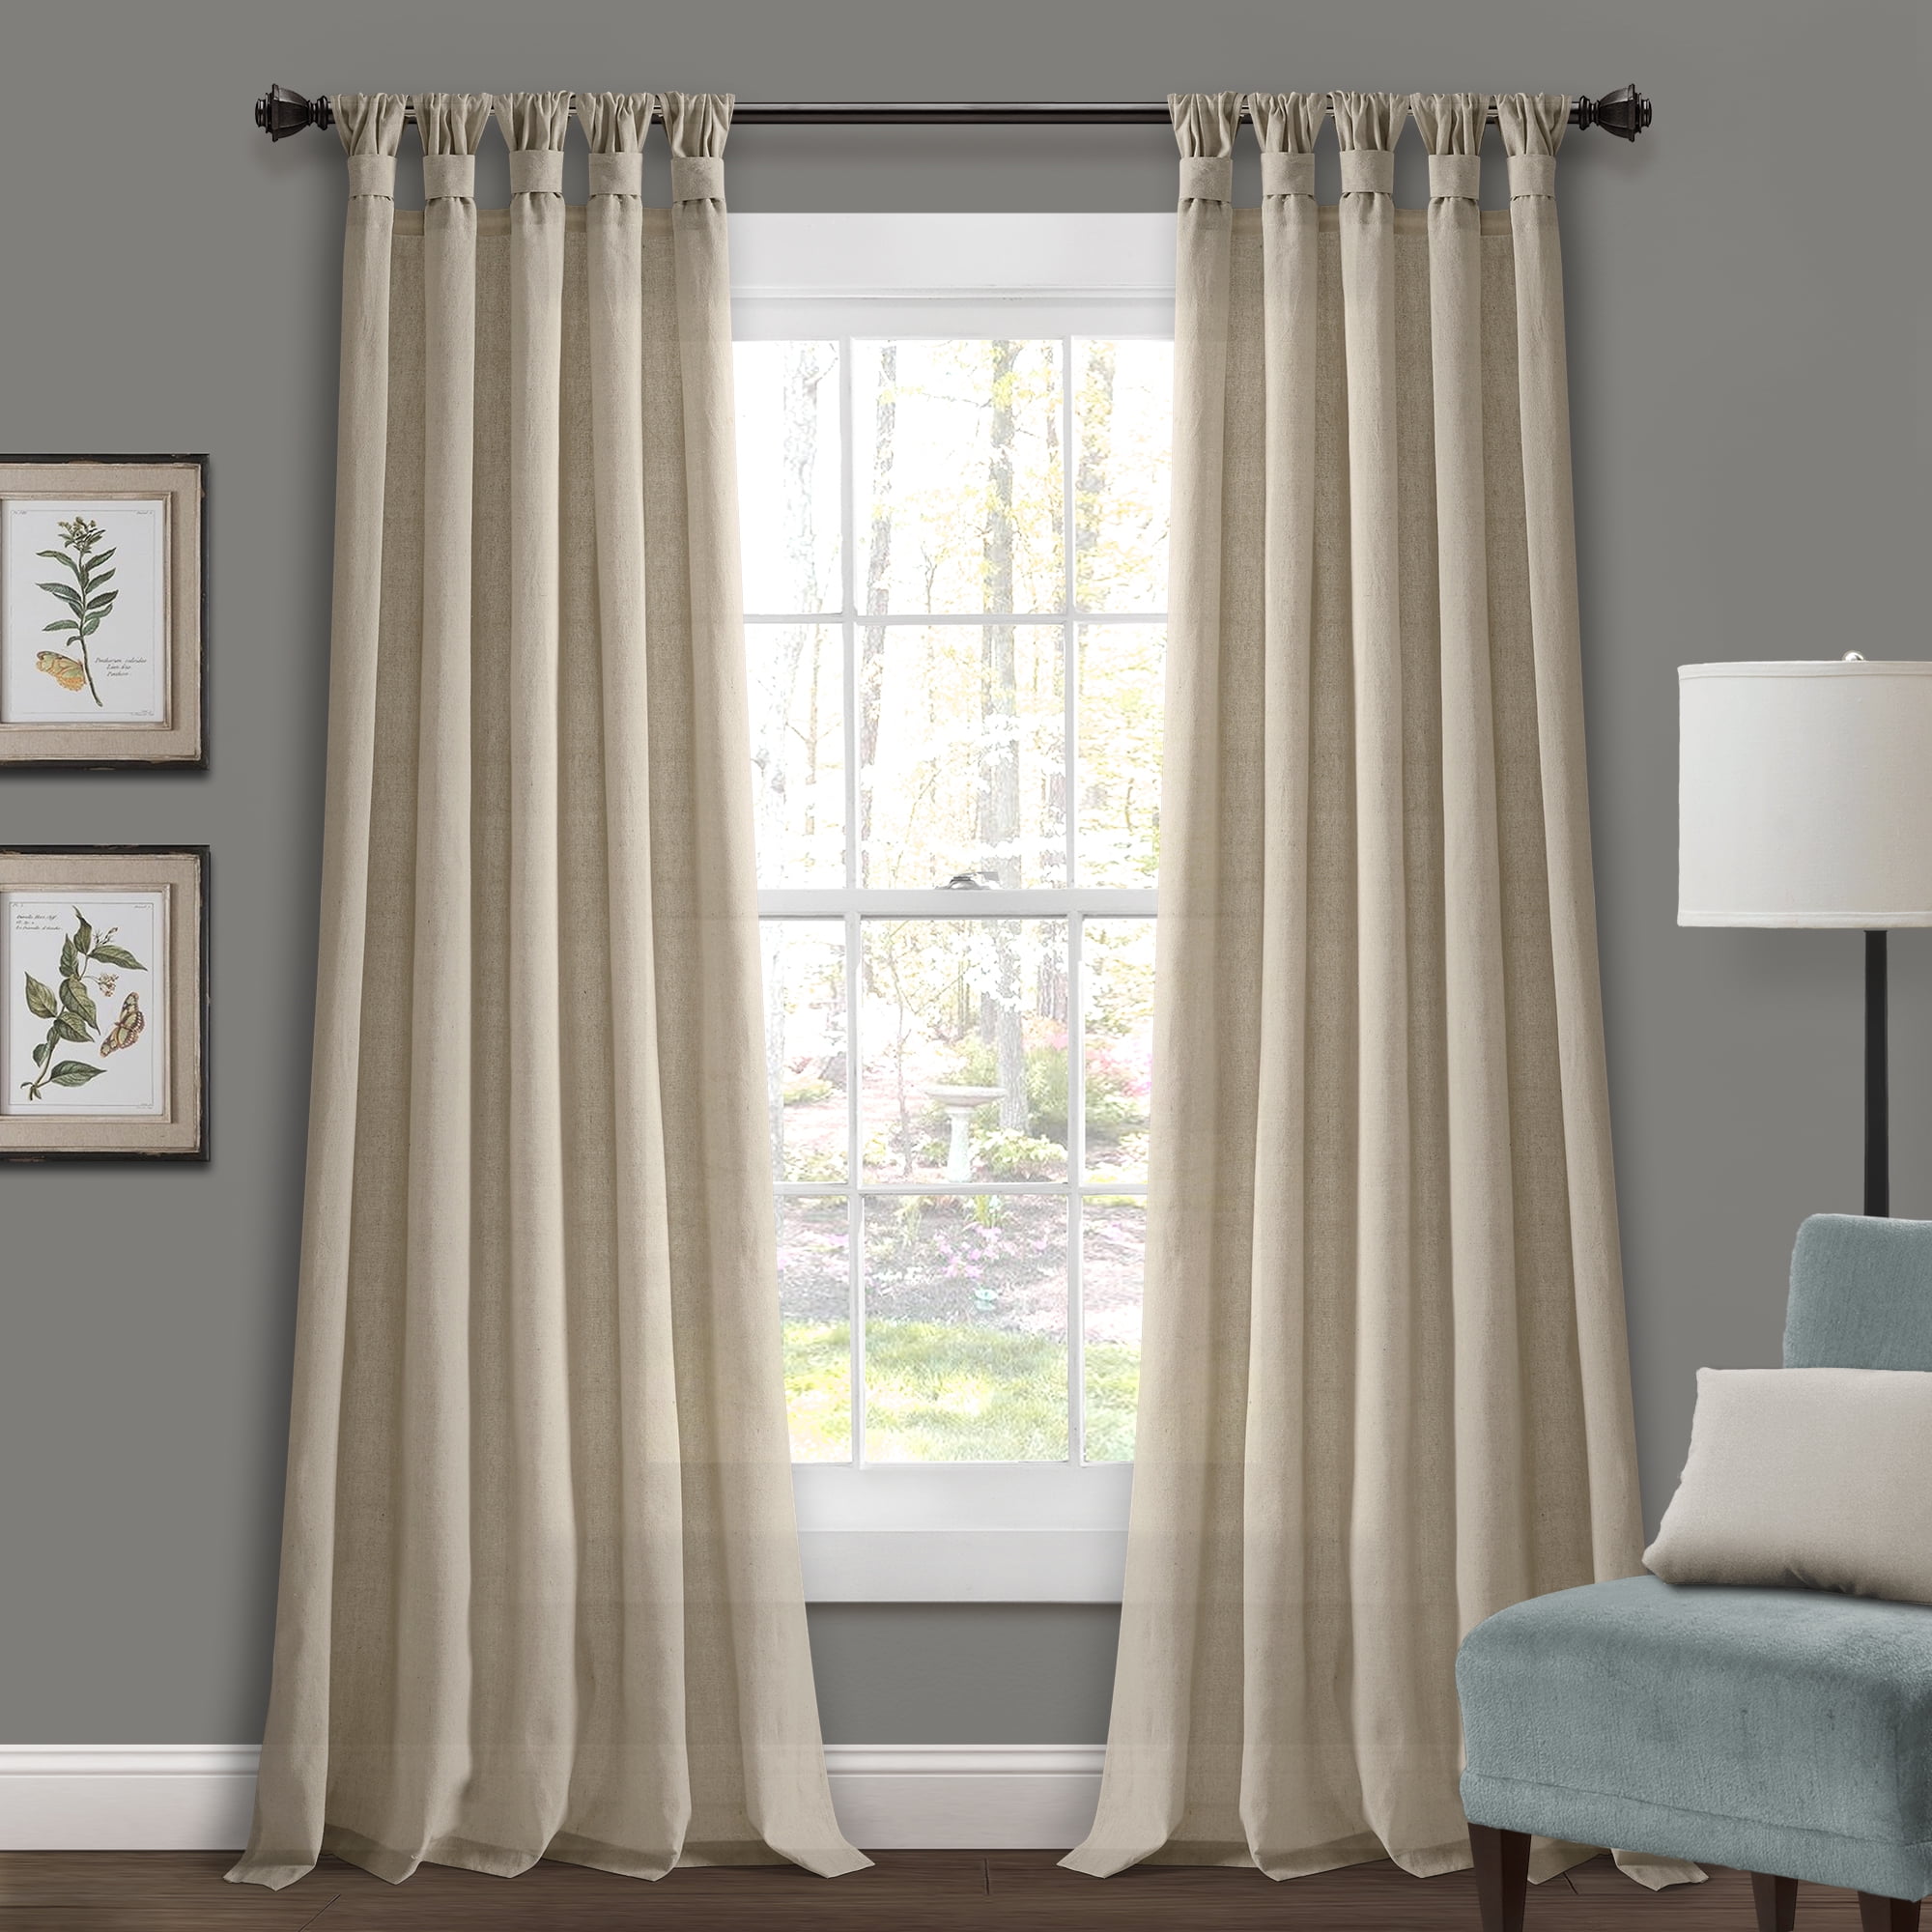 Megachest lucy Woven Voile Tab Top Curtain 2 Panels with ties W142cmXH206cm ivory, 56 wideX81 drop 28 colors 